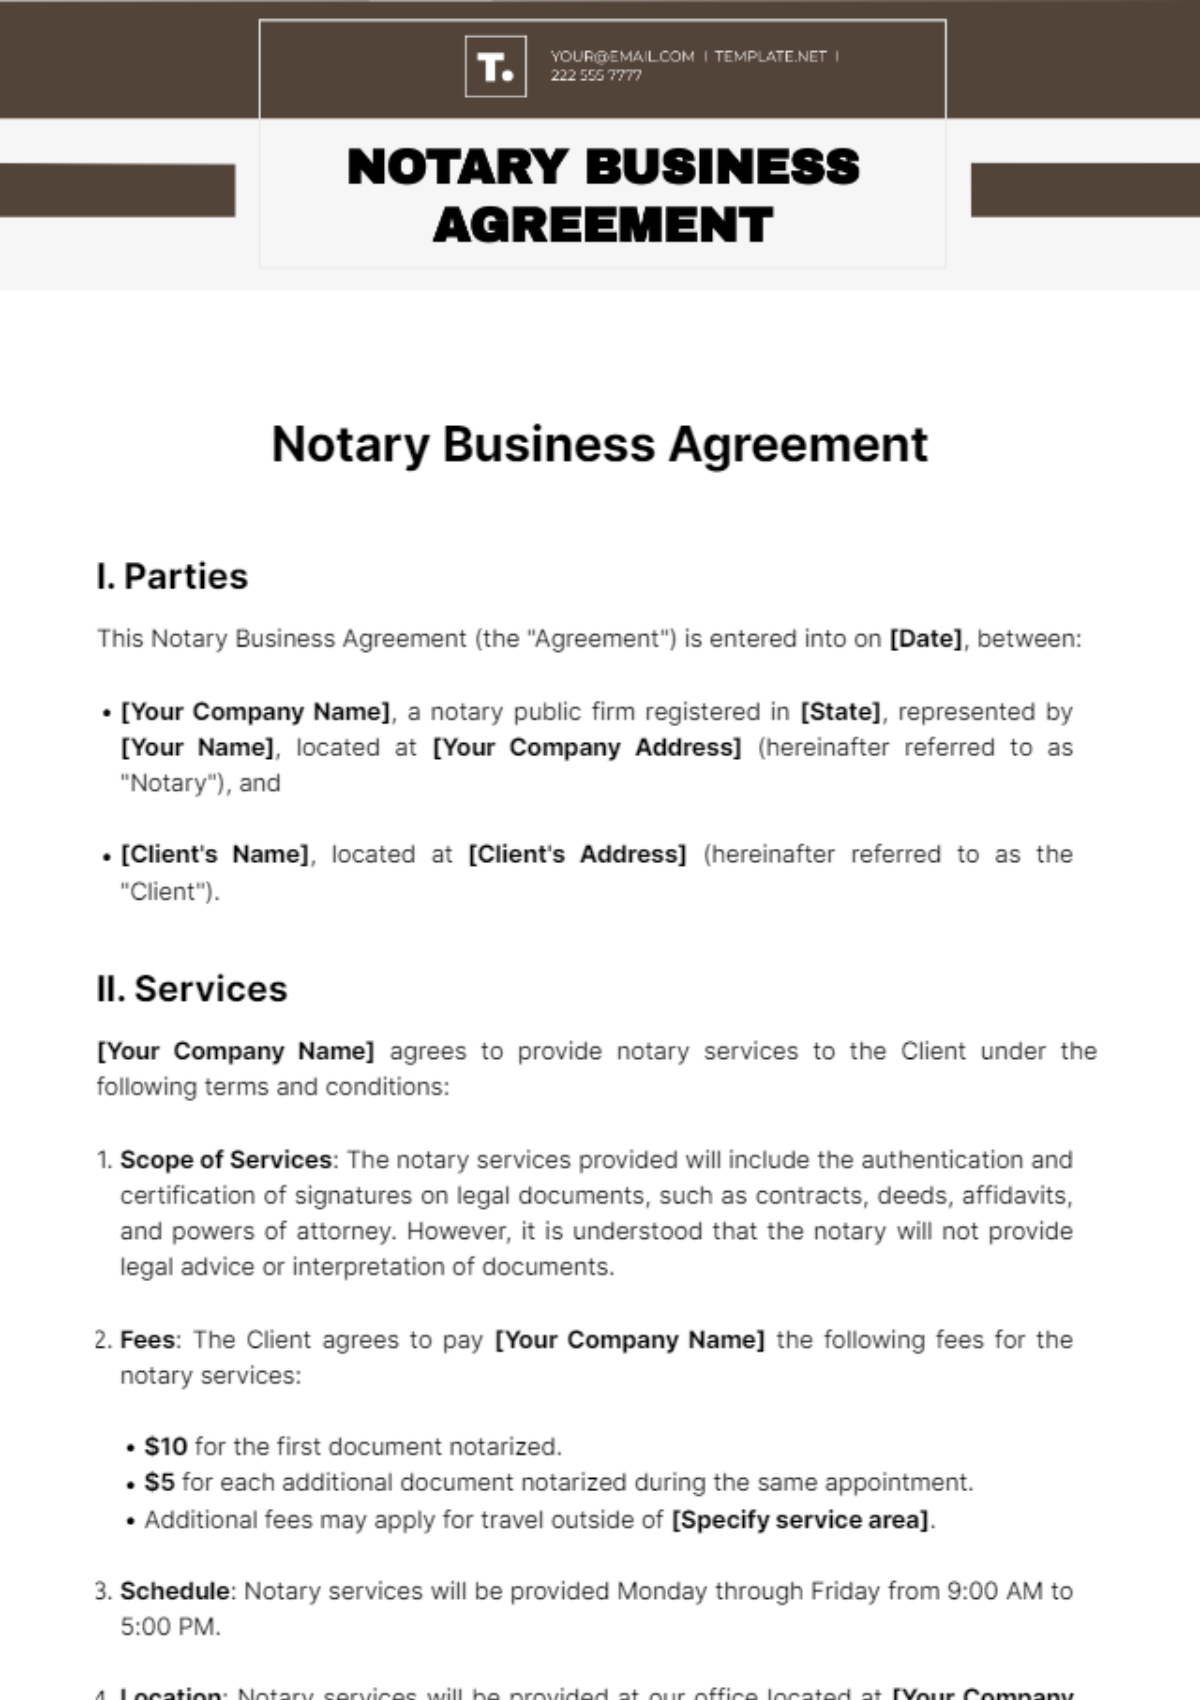 Notary Business Agreement Template